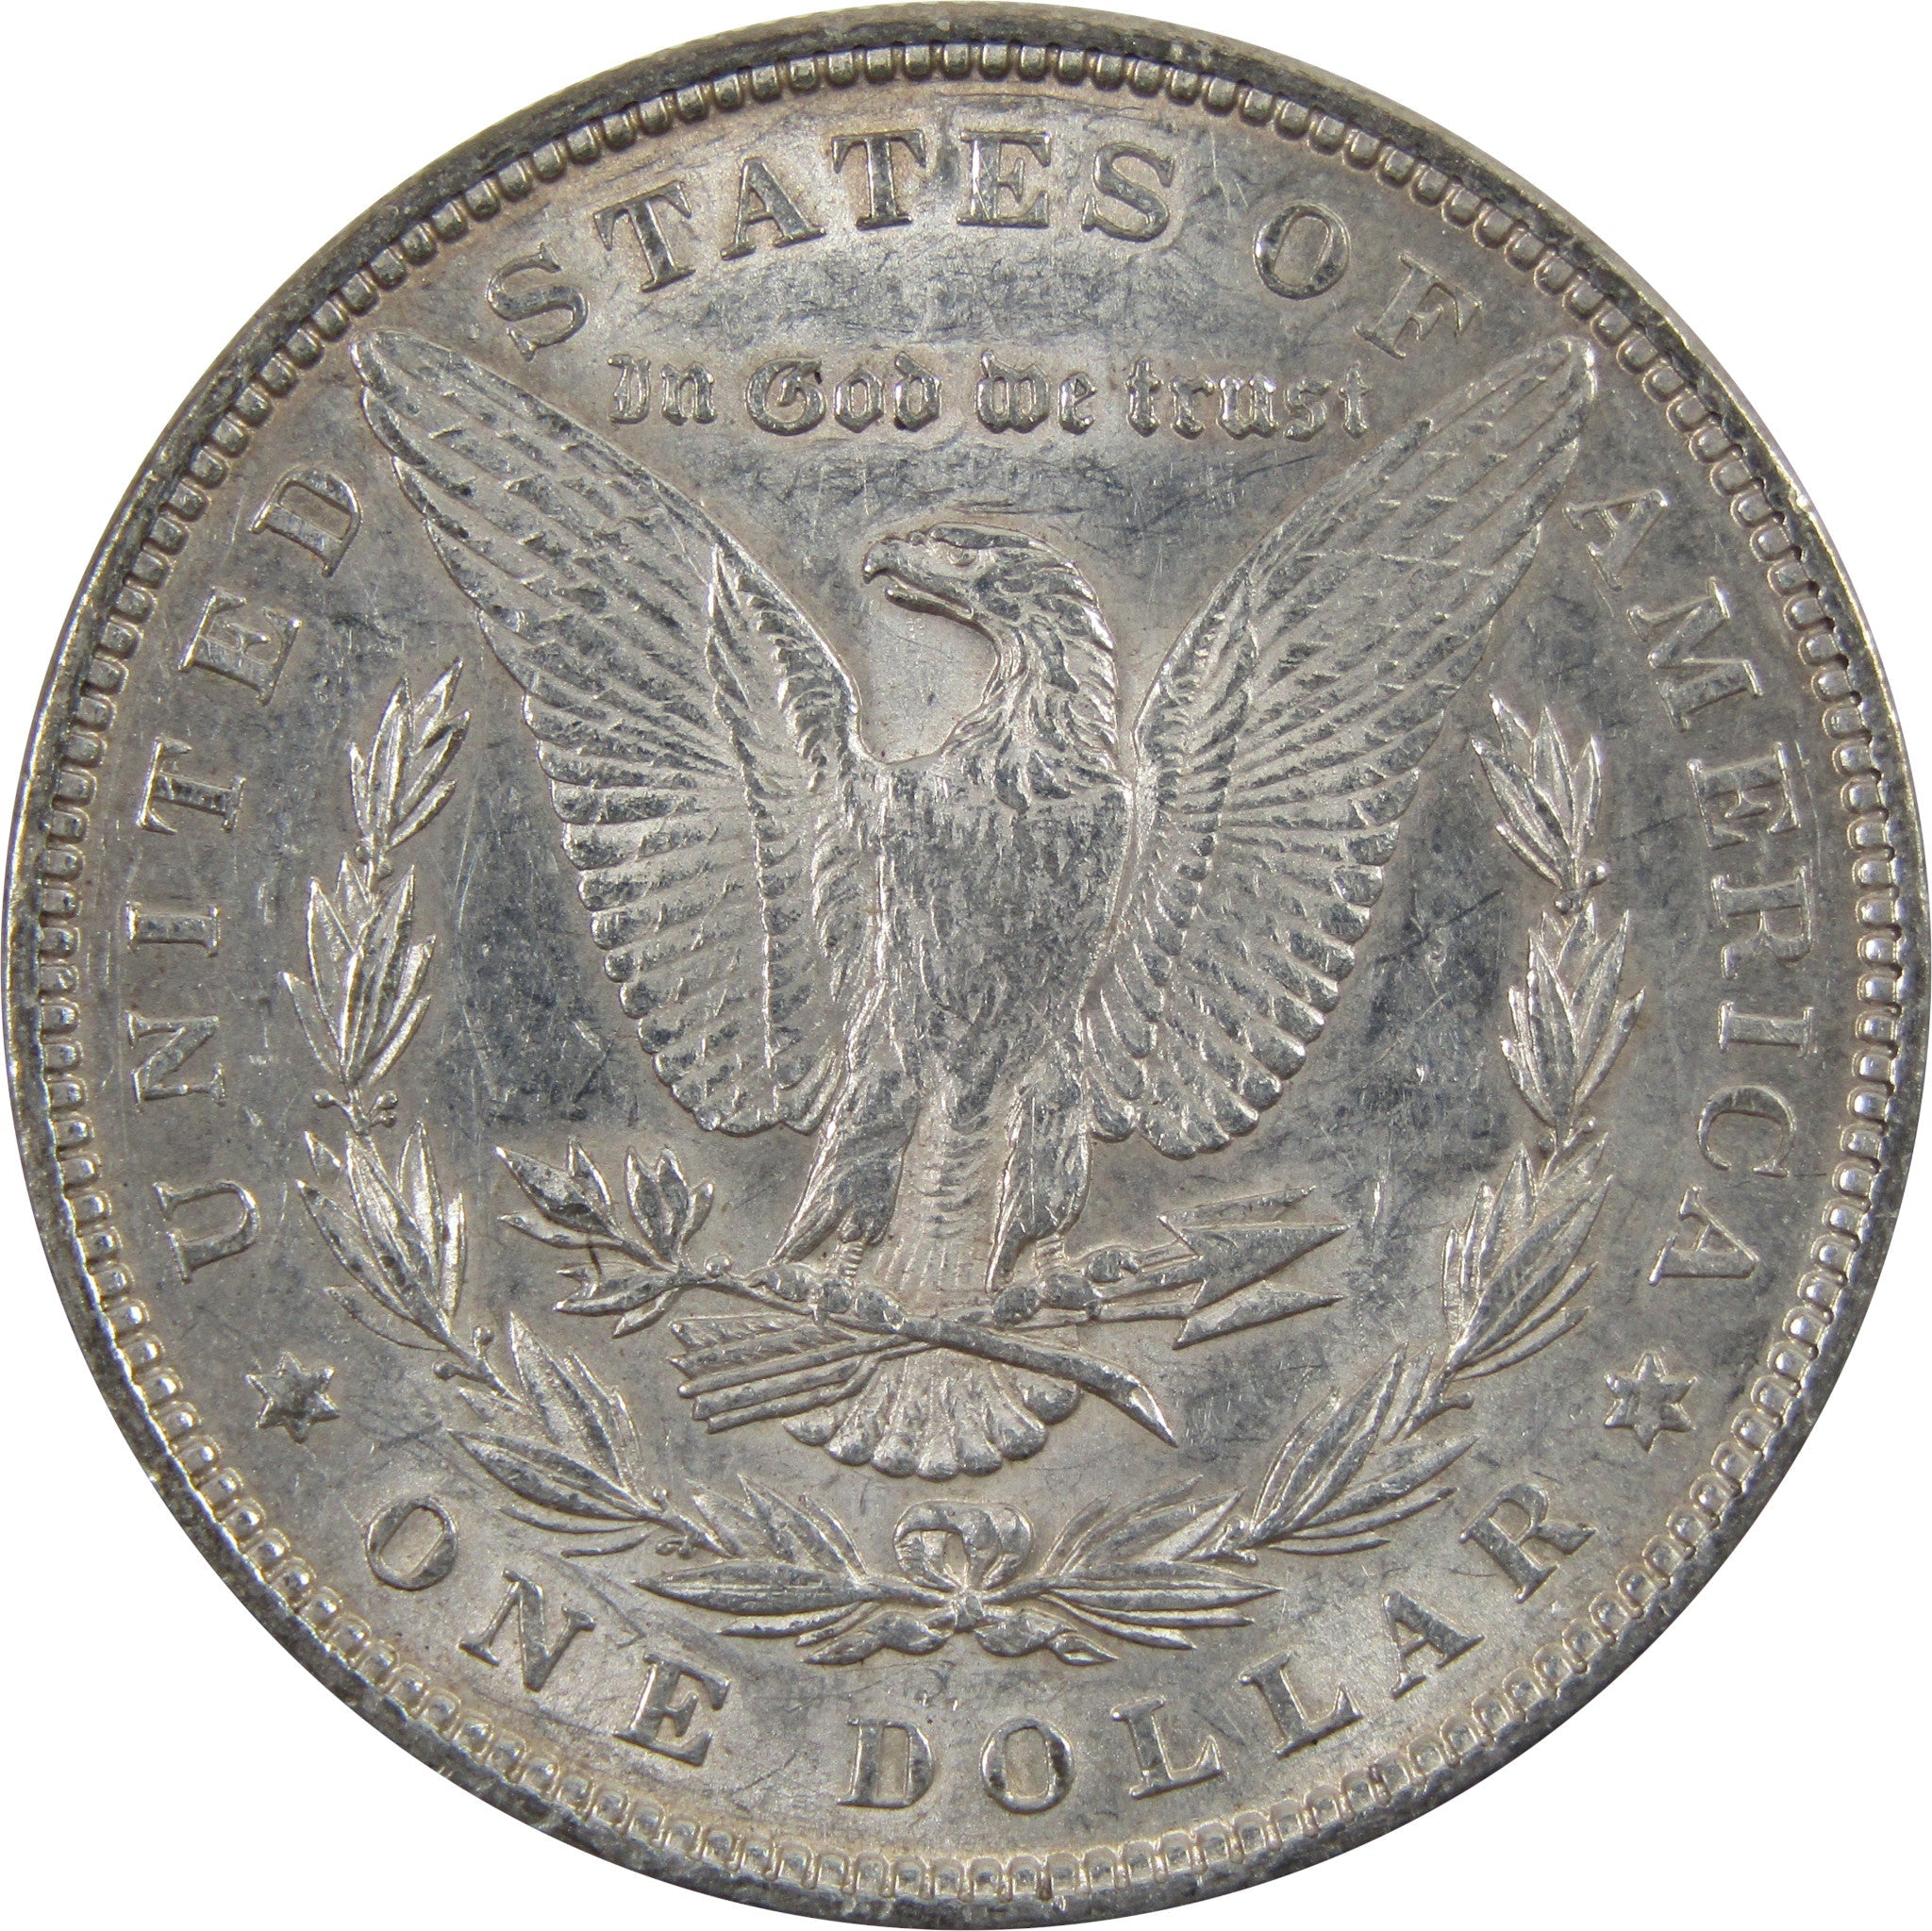 1896 Morgan Dollar AU About Uncirculated 90% Silver $1 Coin SKU:I5477 - Morgan coin - Morgan silver dollar - Morgan silver dollar for sale - Profile Coins &amp; Collectibles